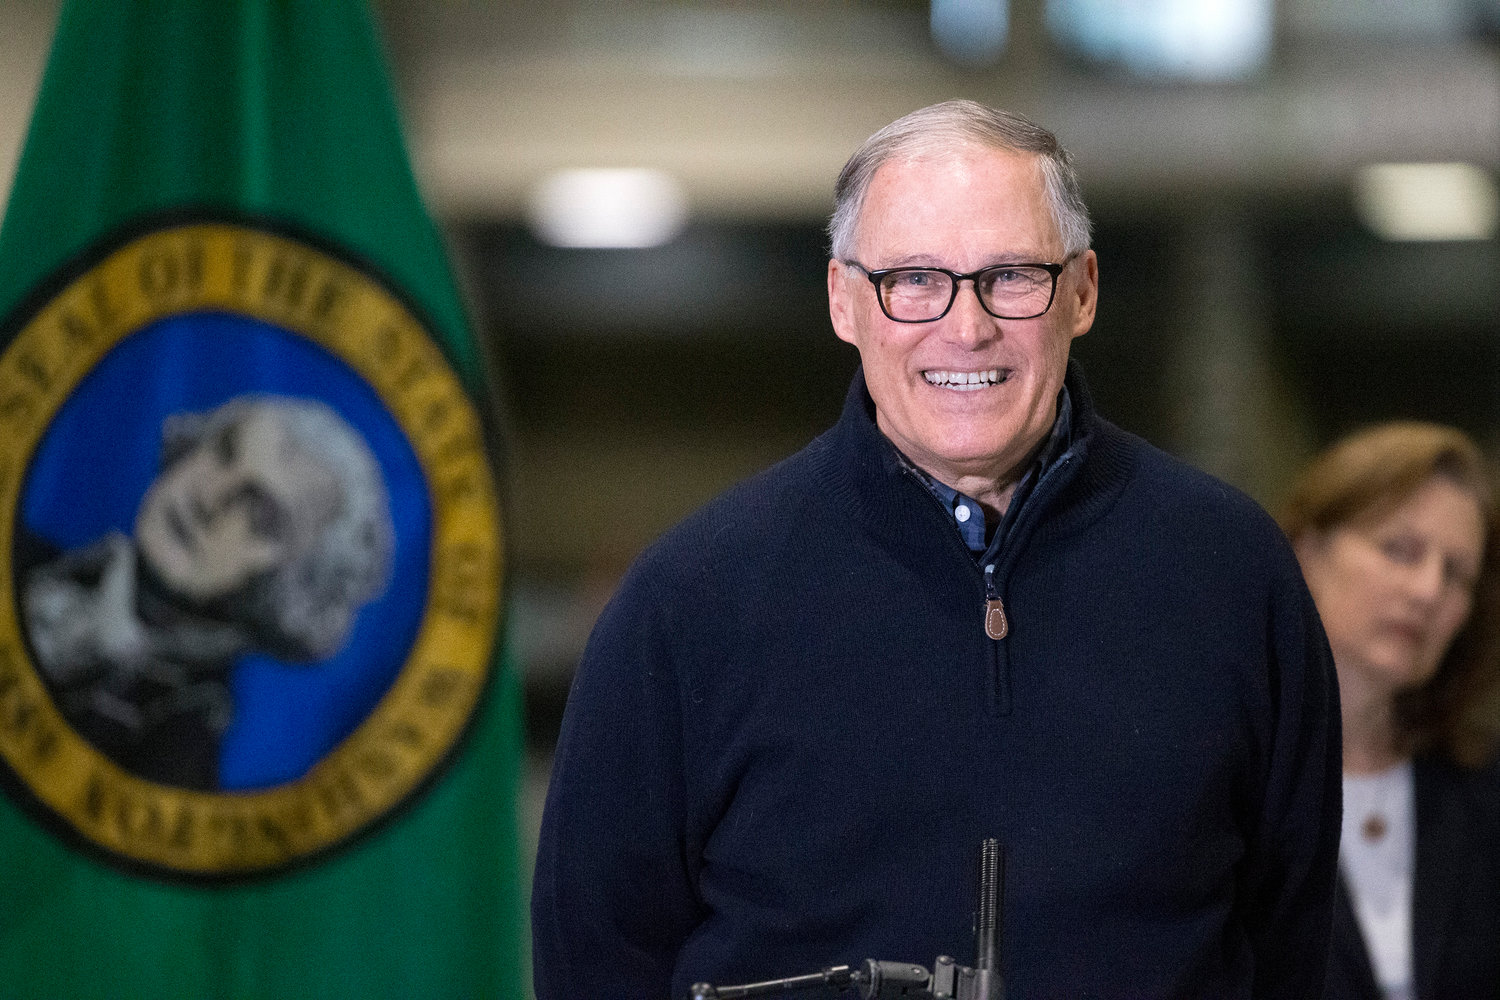 Washington Gov. Jay Inslee has signed into law legislation requiring employers in the state to include salary and benefits information in job postings, rather than waiting to disclose that figure after making an offer. (Karen Ducey/Getty Images/TNS)